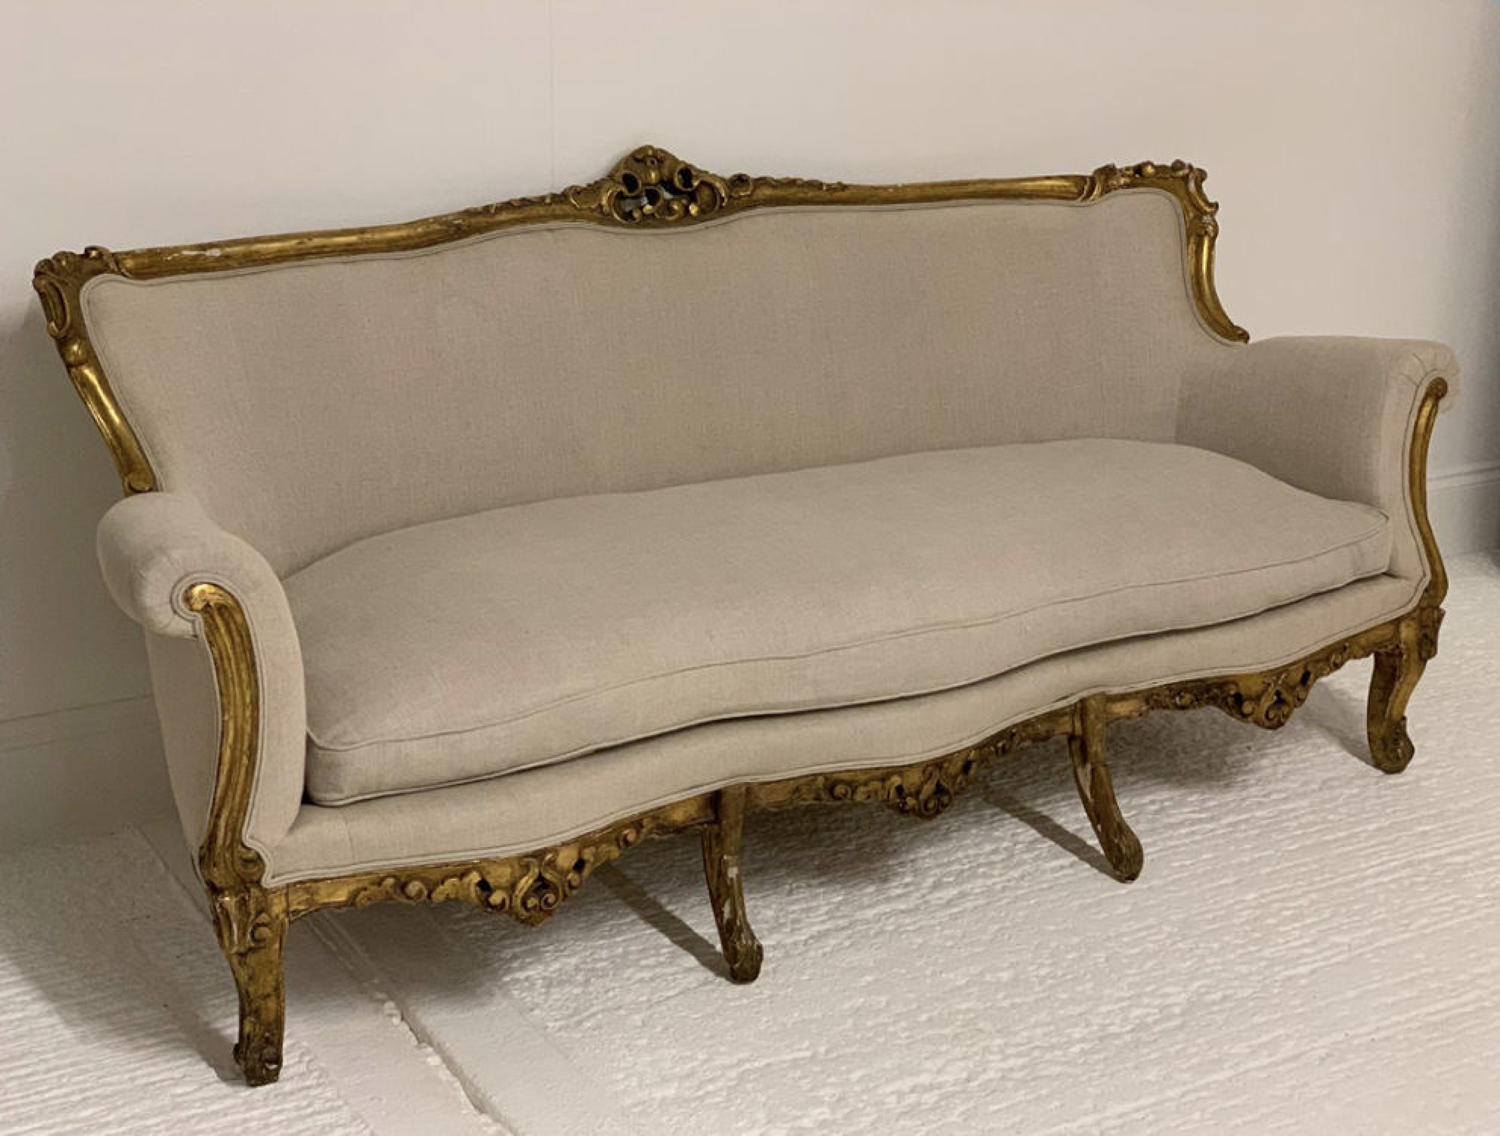 A carved Giltwood sofa